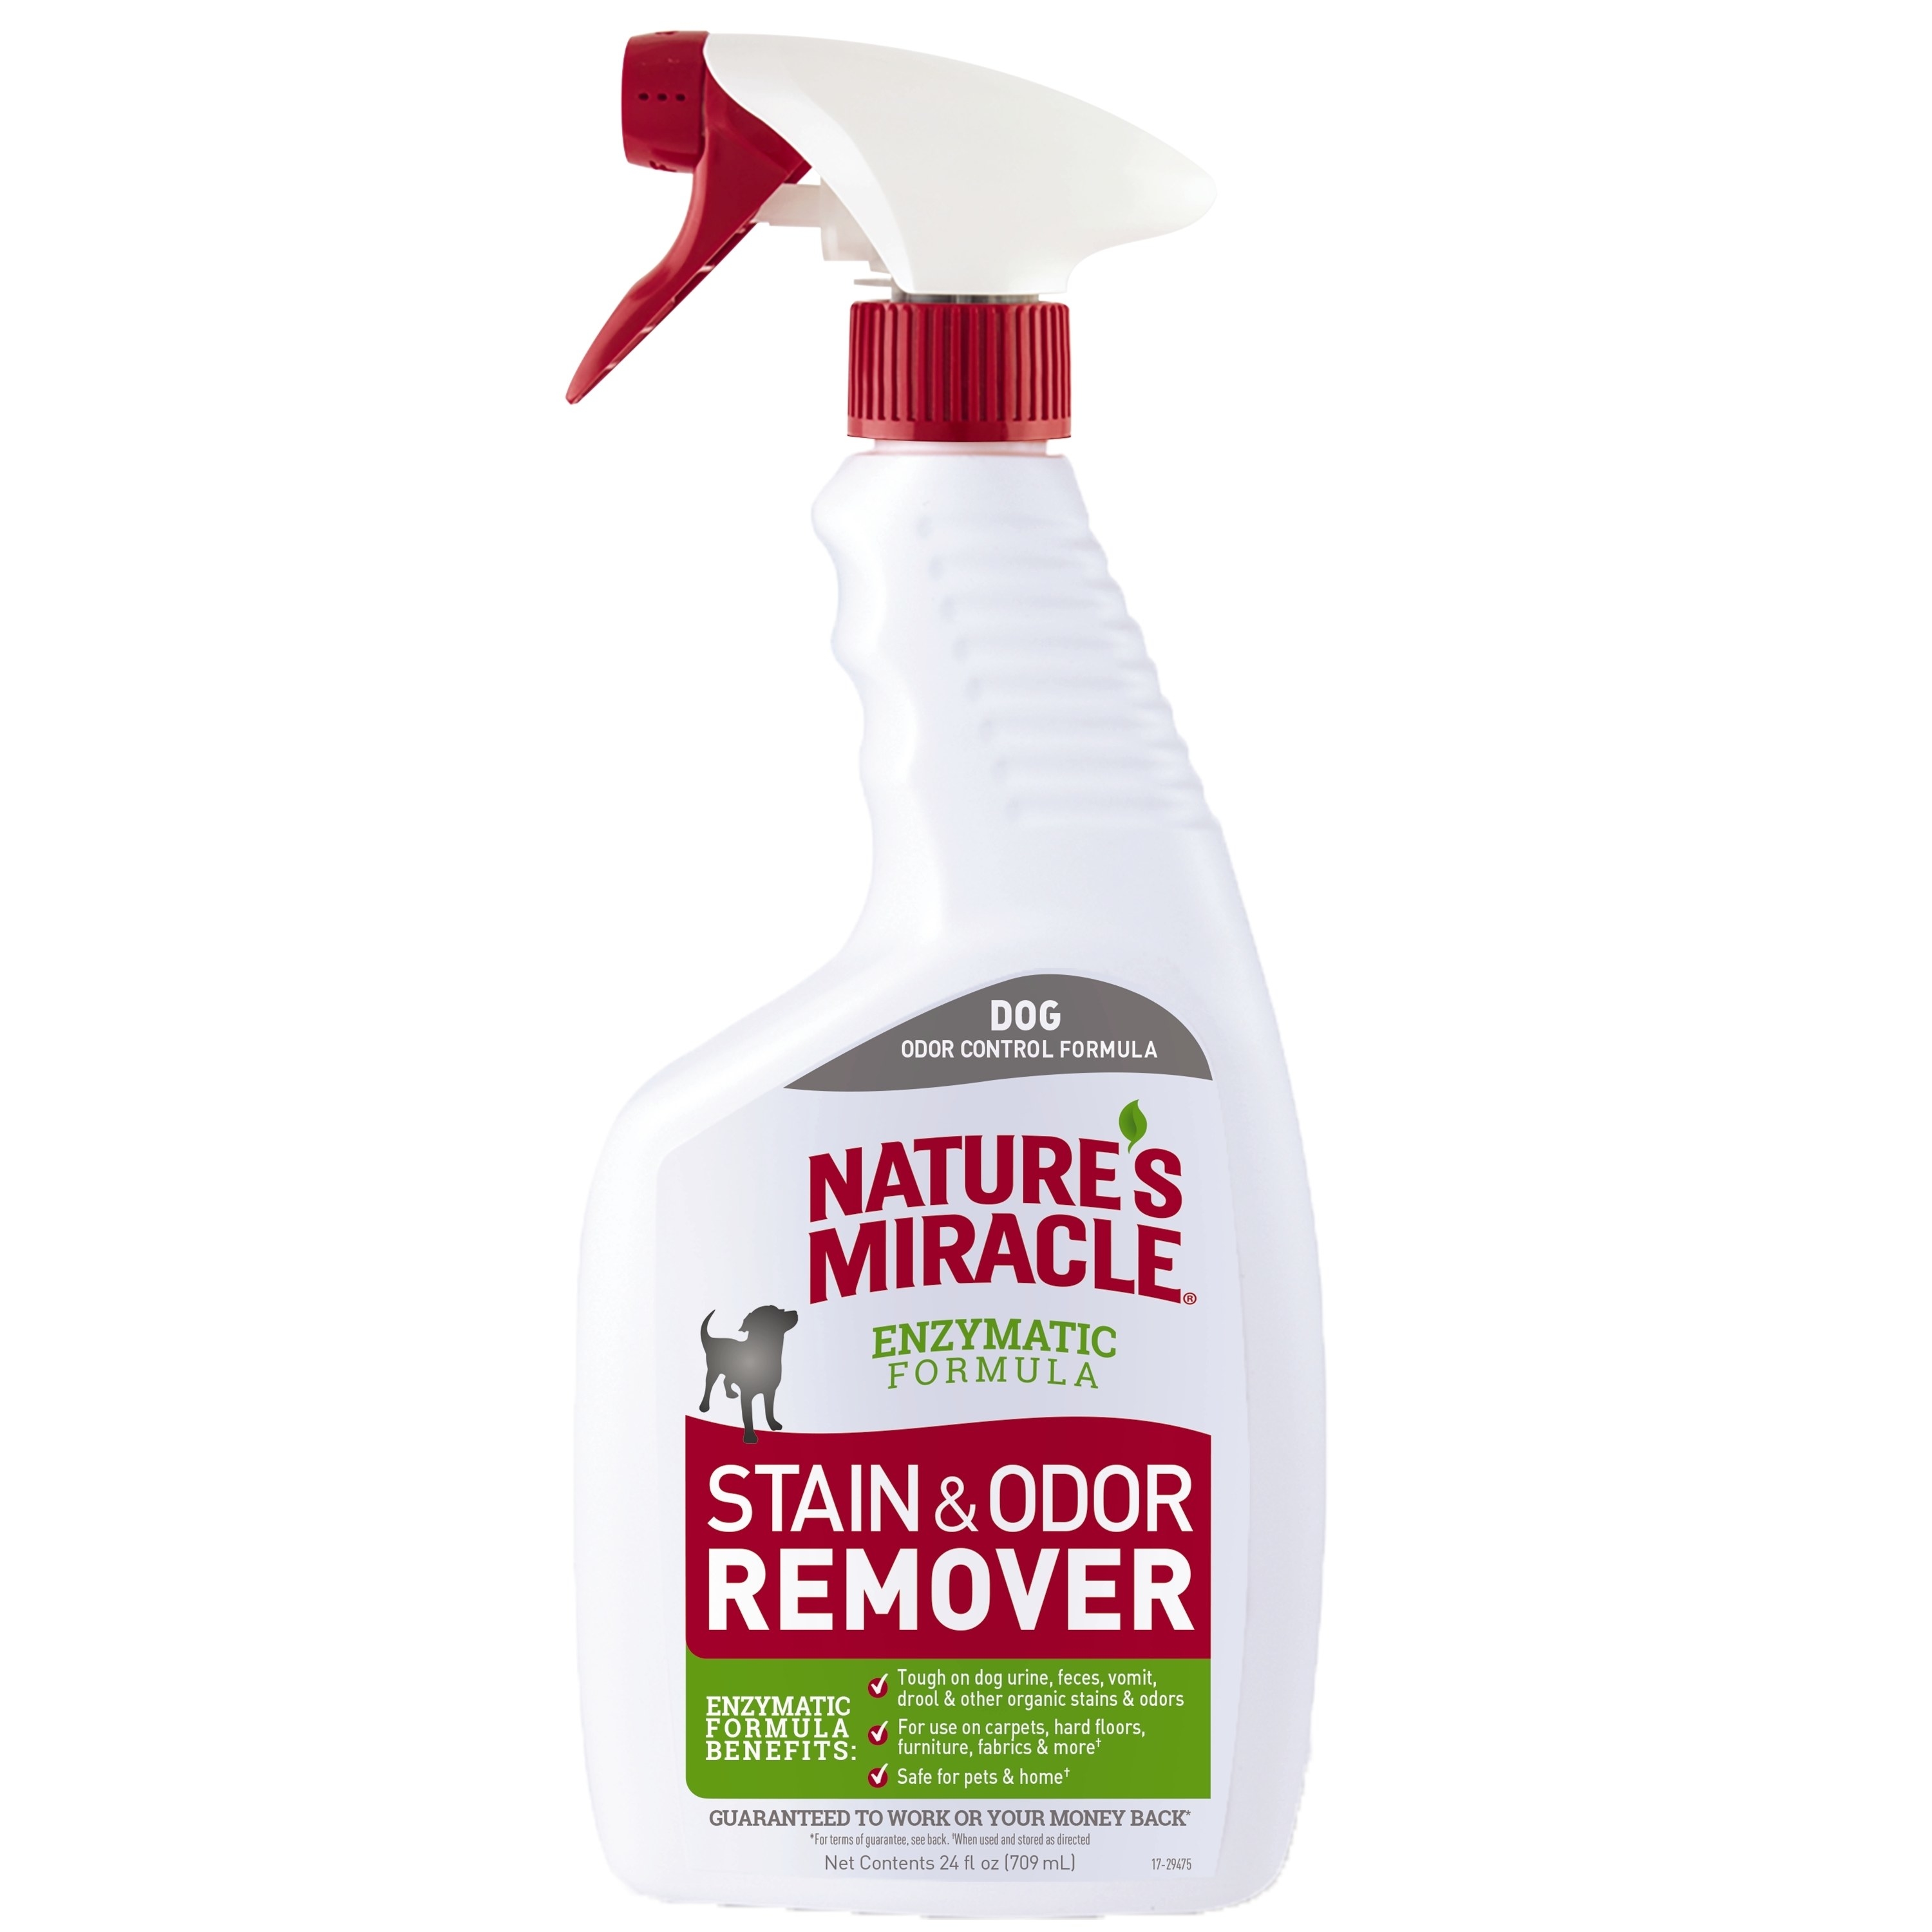 The spray bottle of remover 